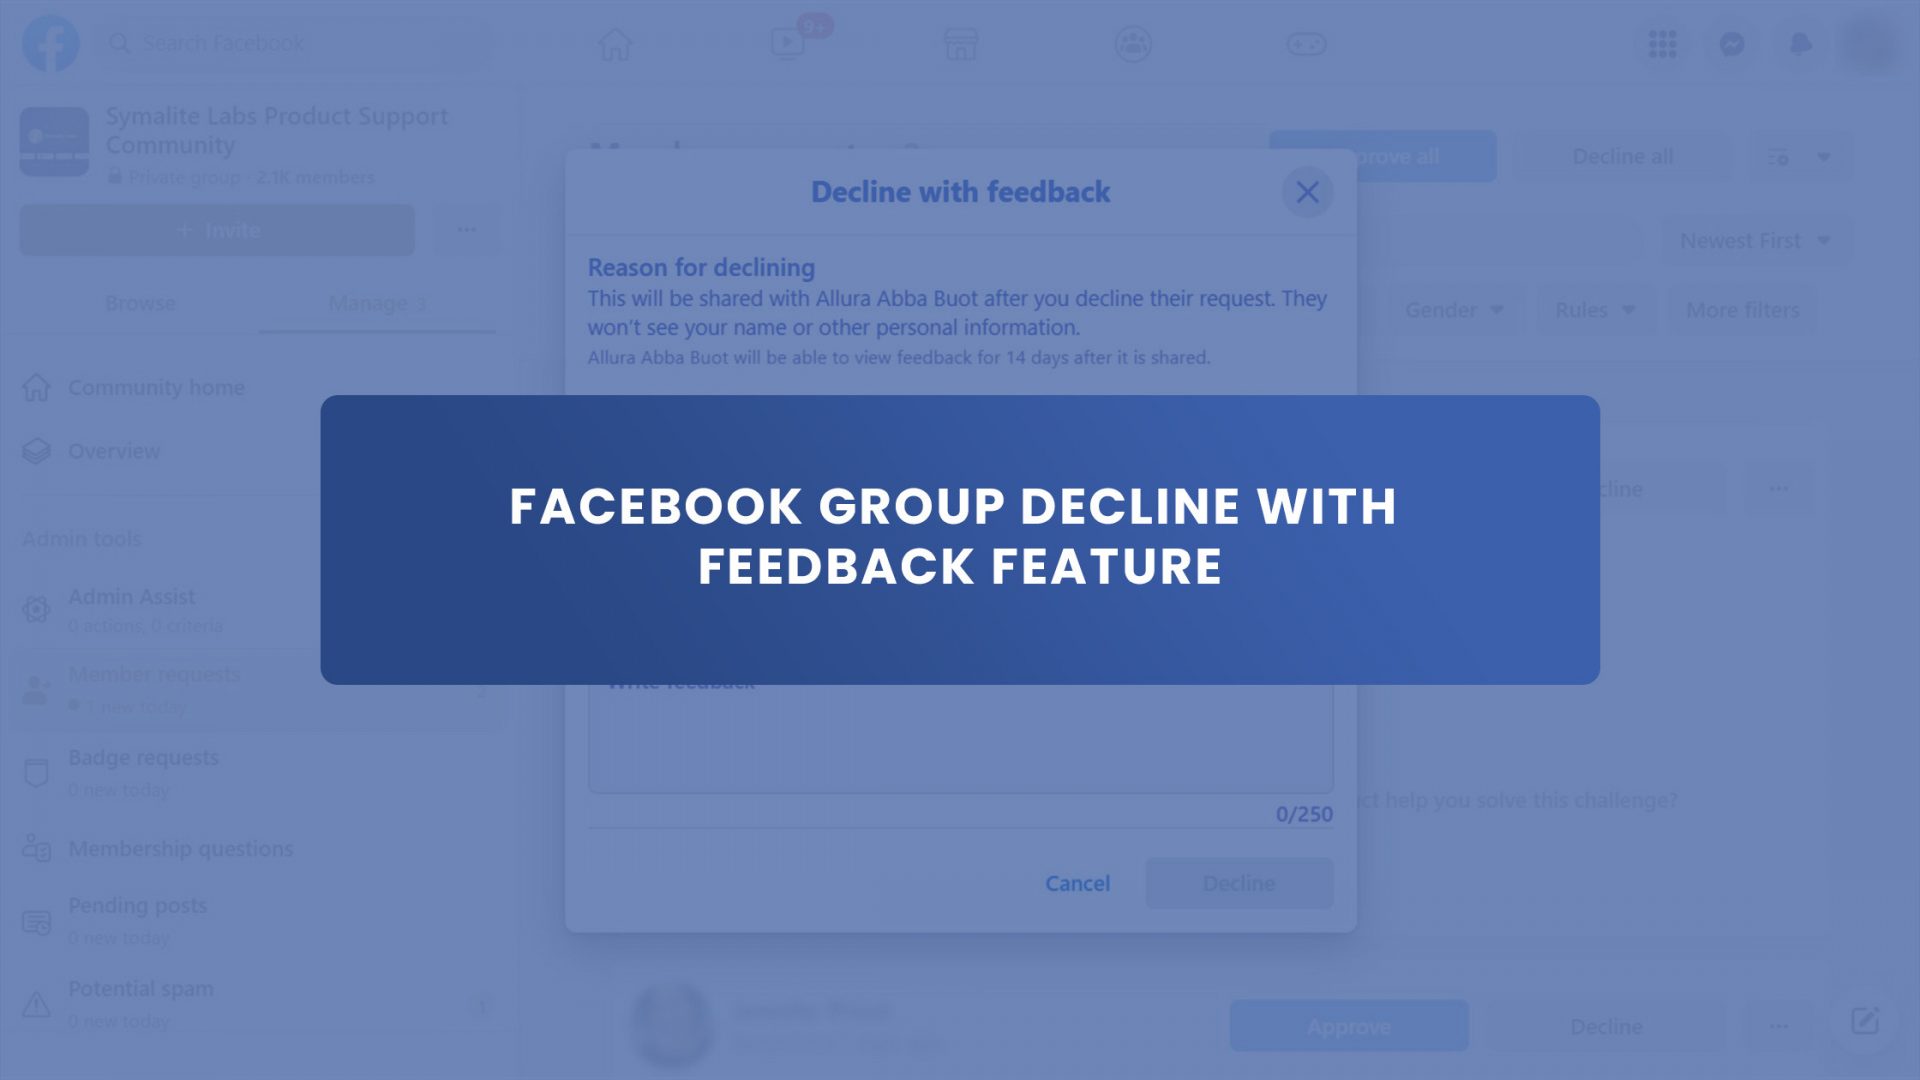 Facebook group decline with feedback feature